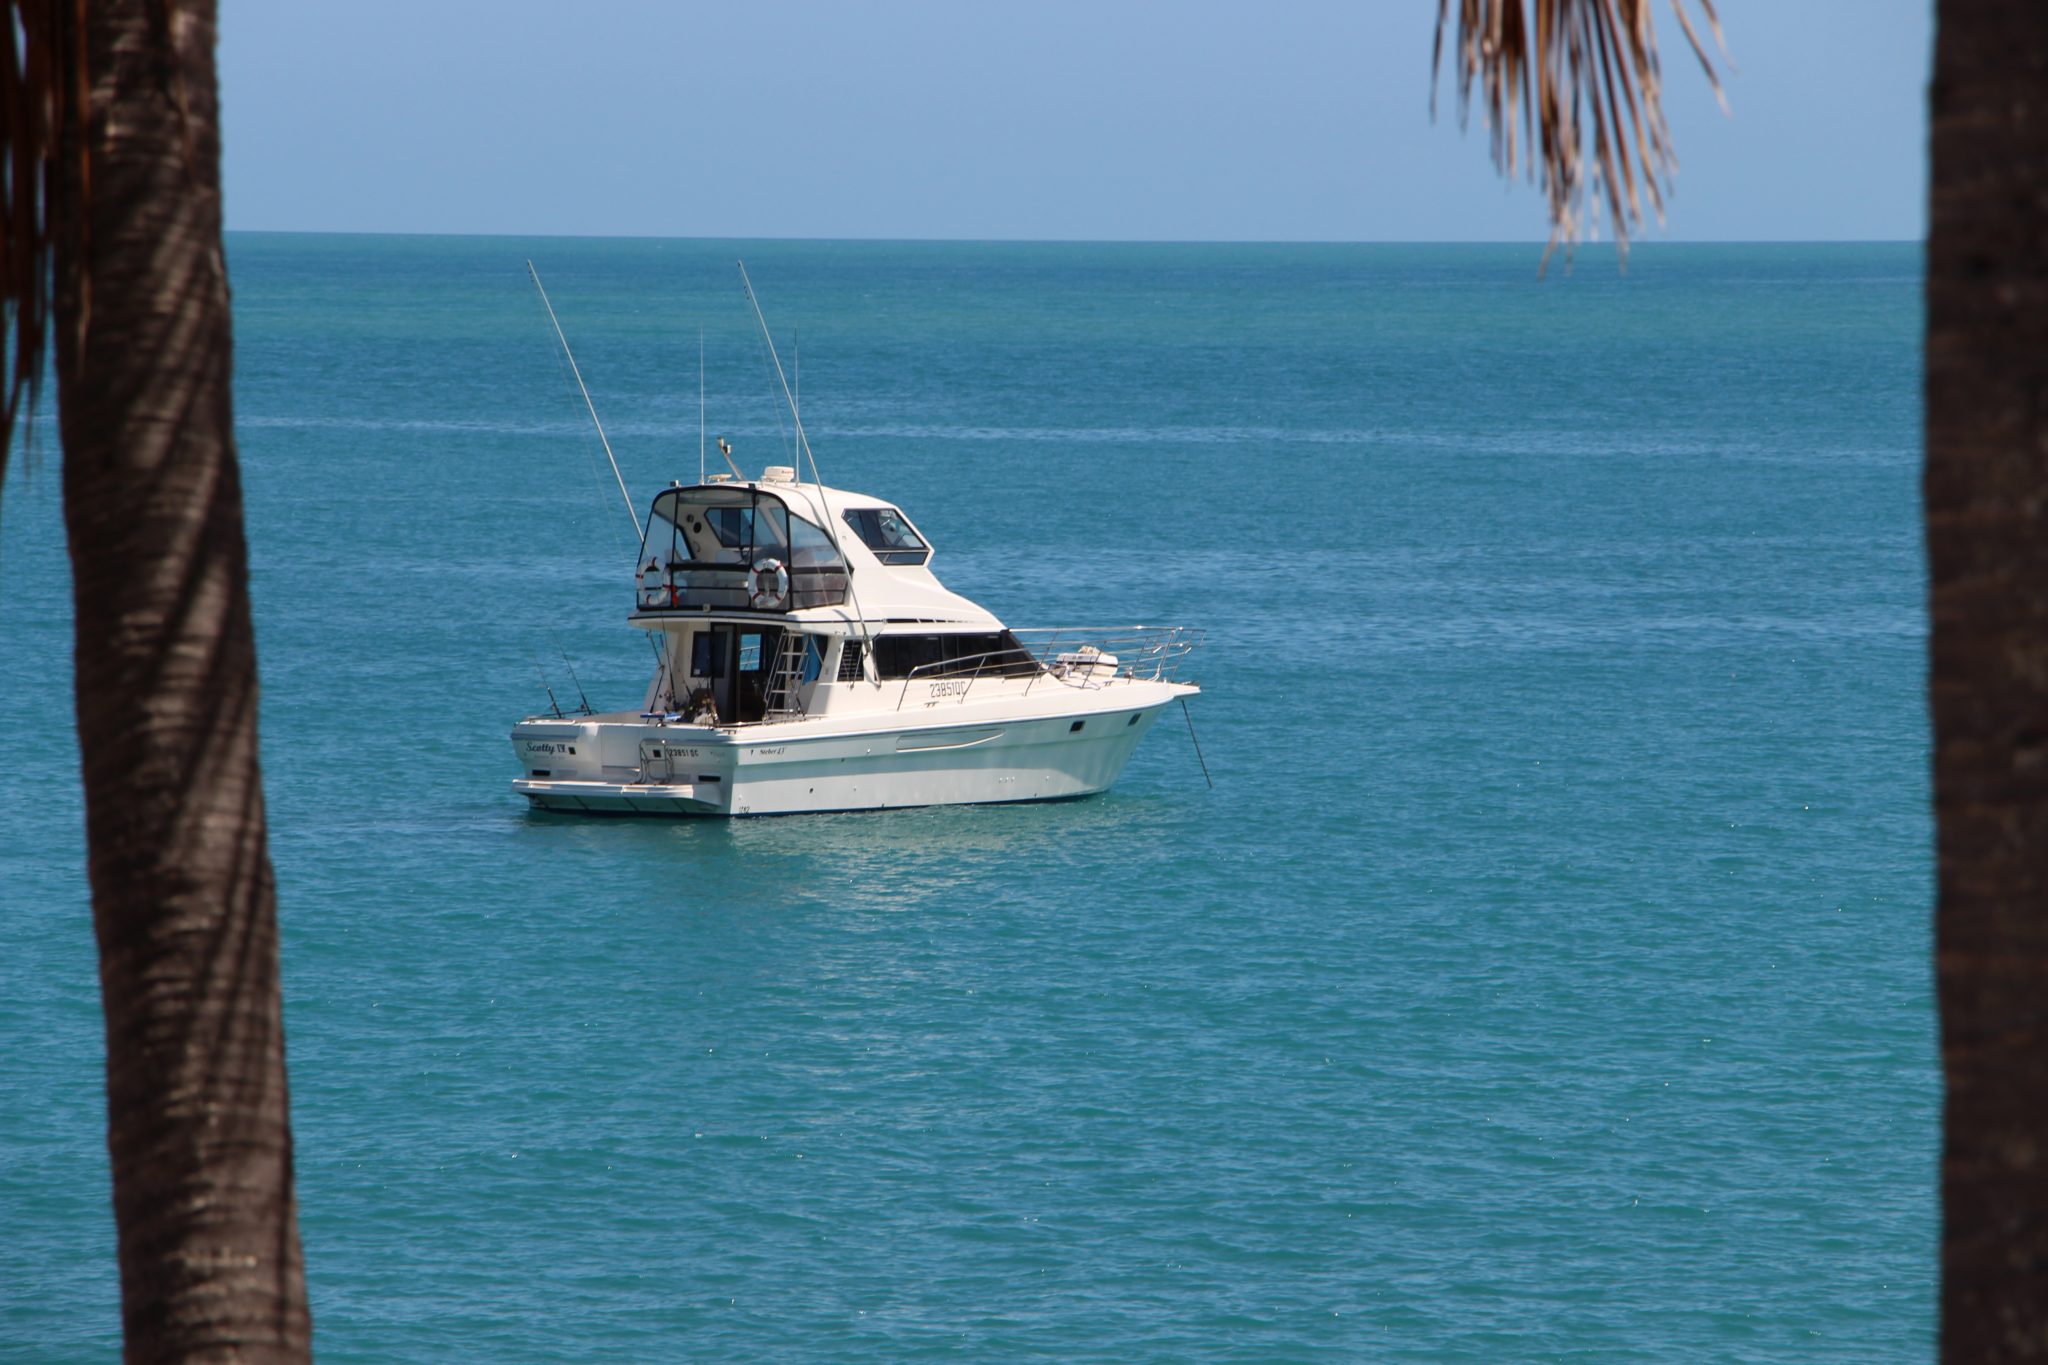 https://fishandboat.com.au/wp-content/uploads/Anchored-at-Midddle-Percy-island-on-the-way-to-Mackay-scaled.jpg